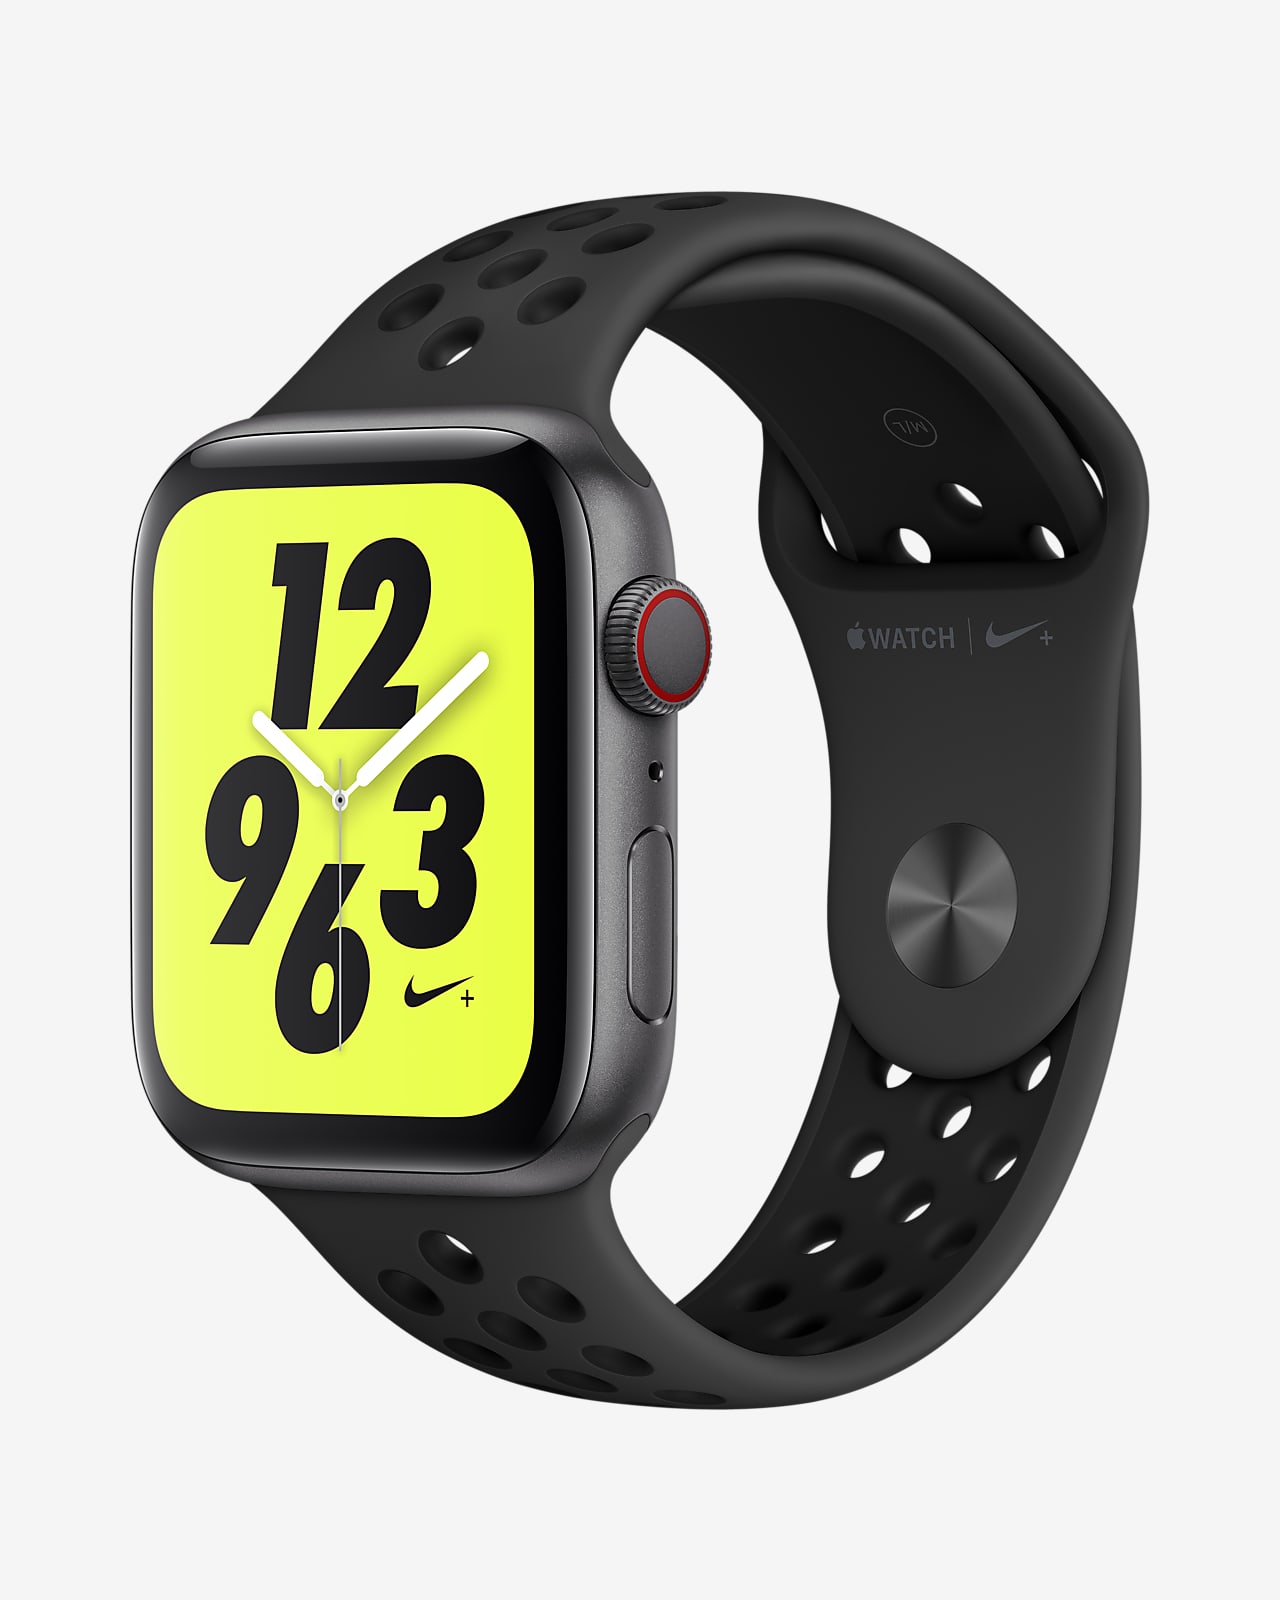 Apple Watch Nike+ Series 4 (GPS + Cellular) with Nike Sport Band Open Box  44mm Sport Watch